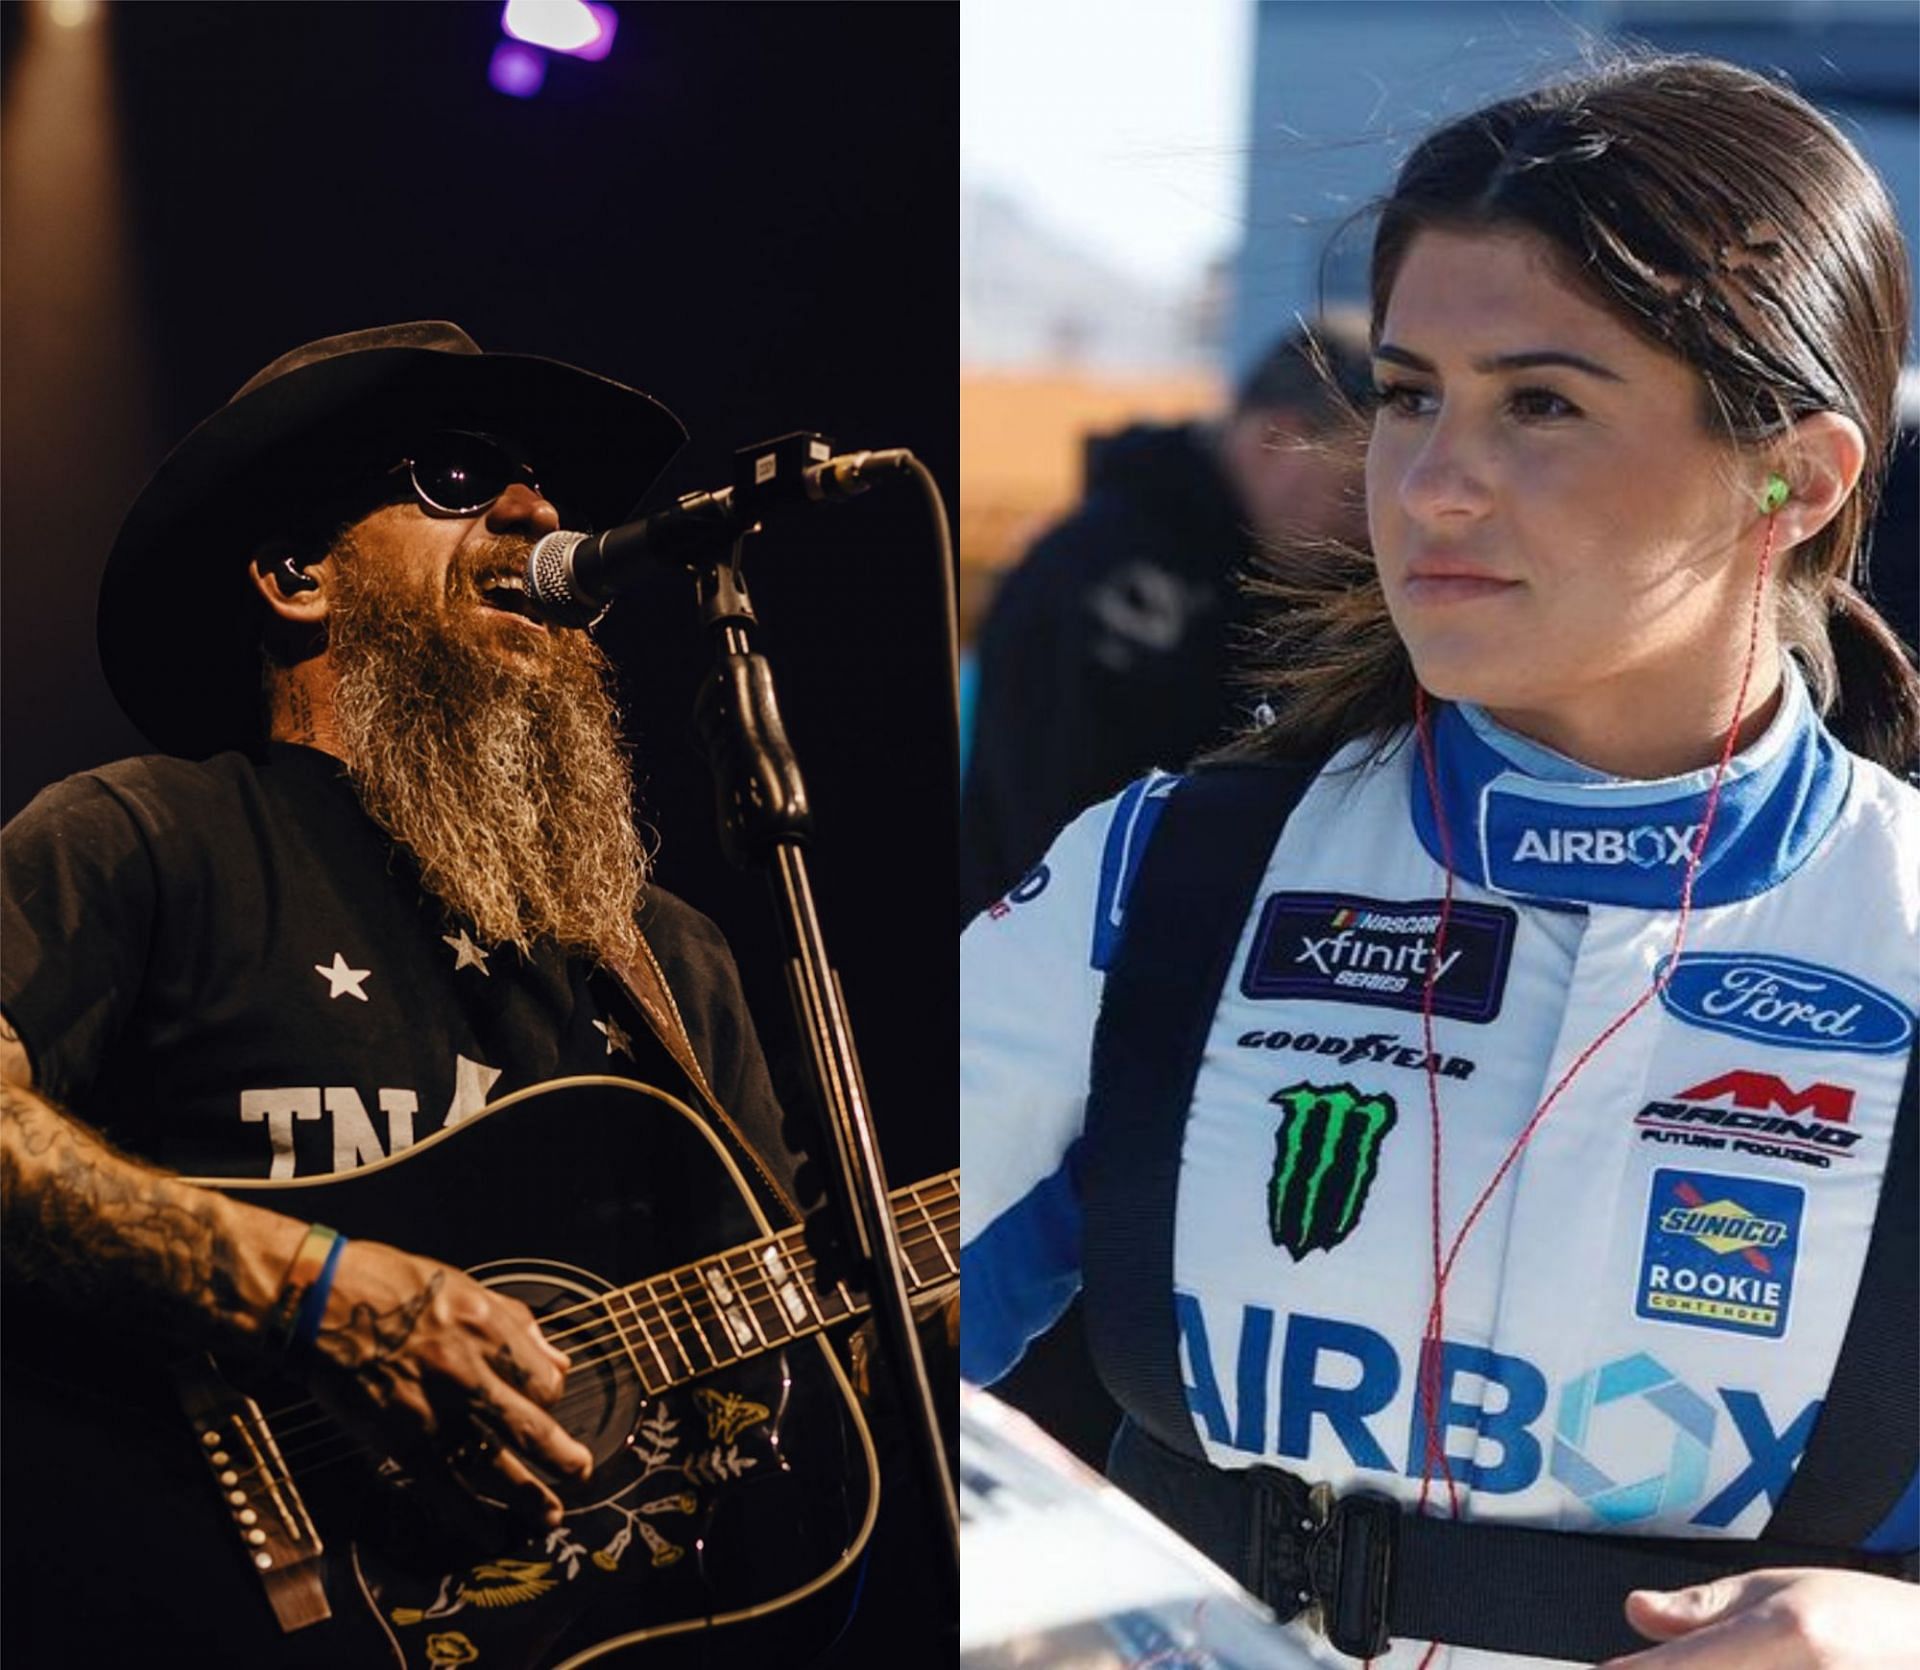 (L-R) Outlaw country  singer Cody Jinks with NASCAR Xfinity Series driver Hailie Deegan